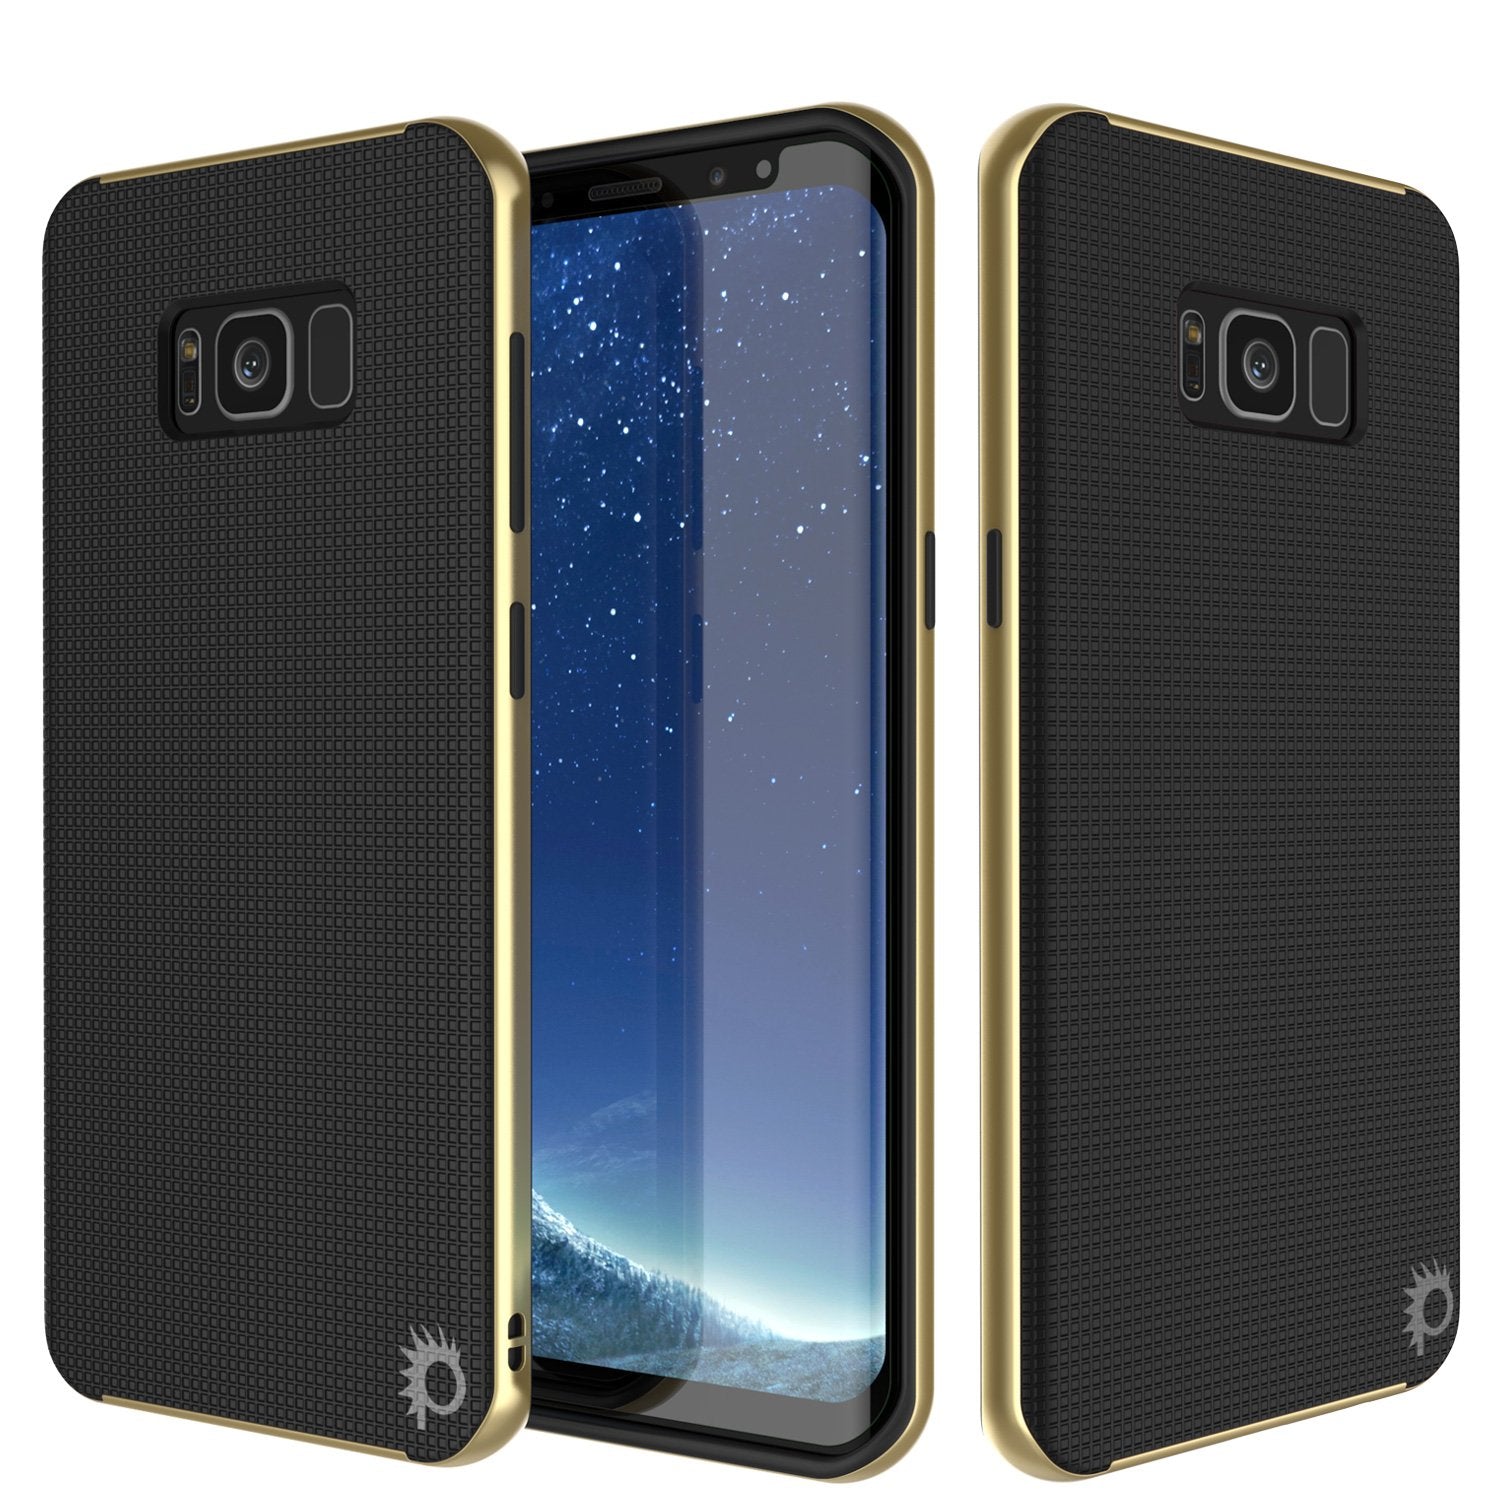 Galaxy S8 PLUS Case, PunkCase [Stealth Series] Hybrid 3-Piece Shockproof Dual Layer Cover [Non-Slip] [Soft TPU + PC Bumper] with PUNKSHIELD Screen Protector for Samsung S8+ [Gold]